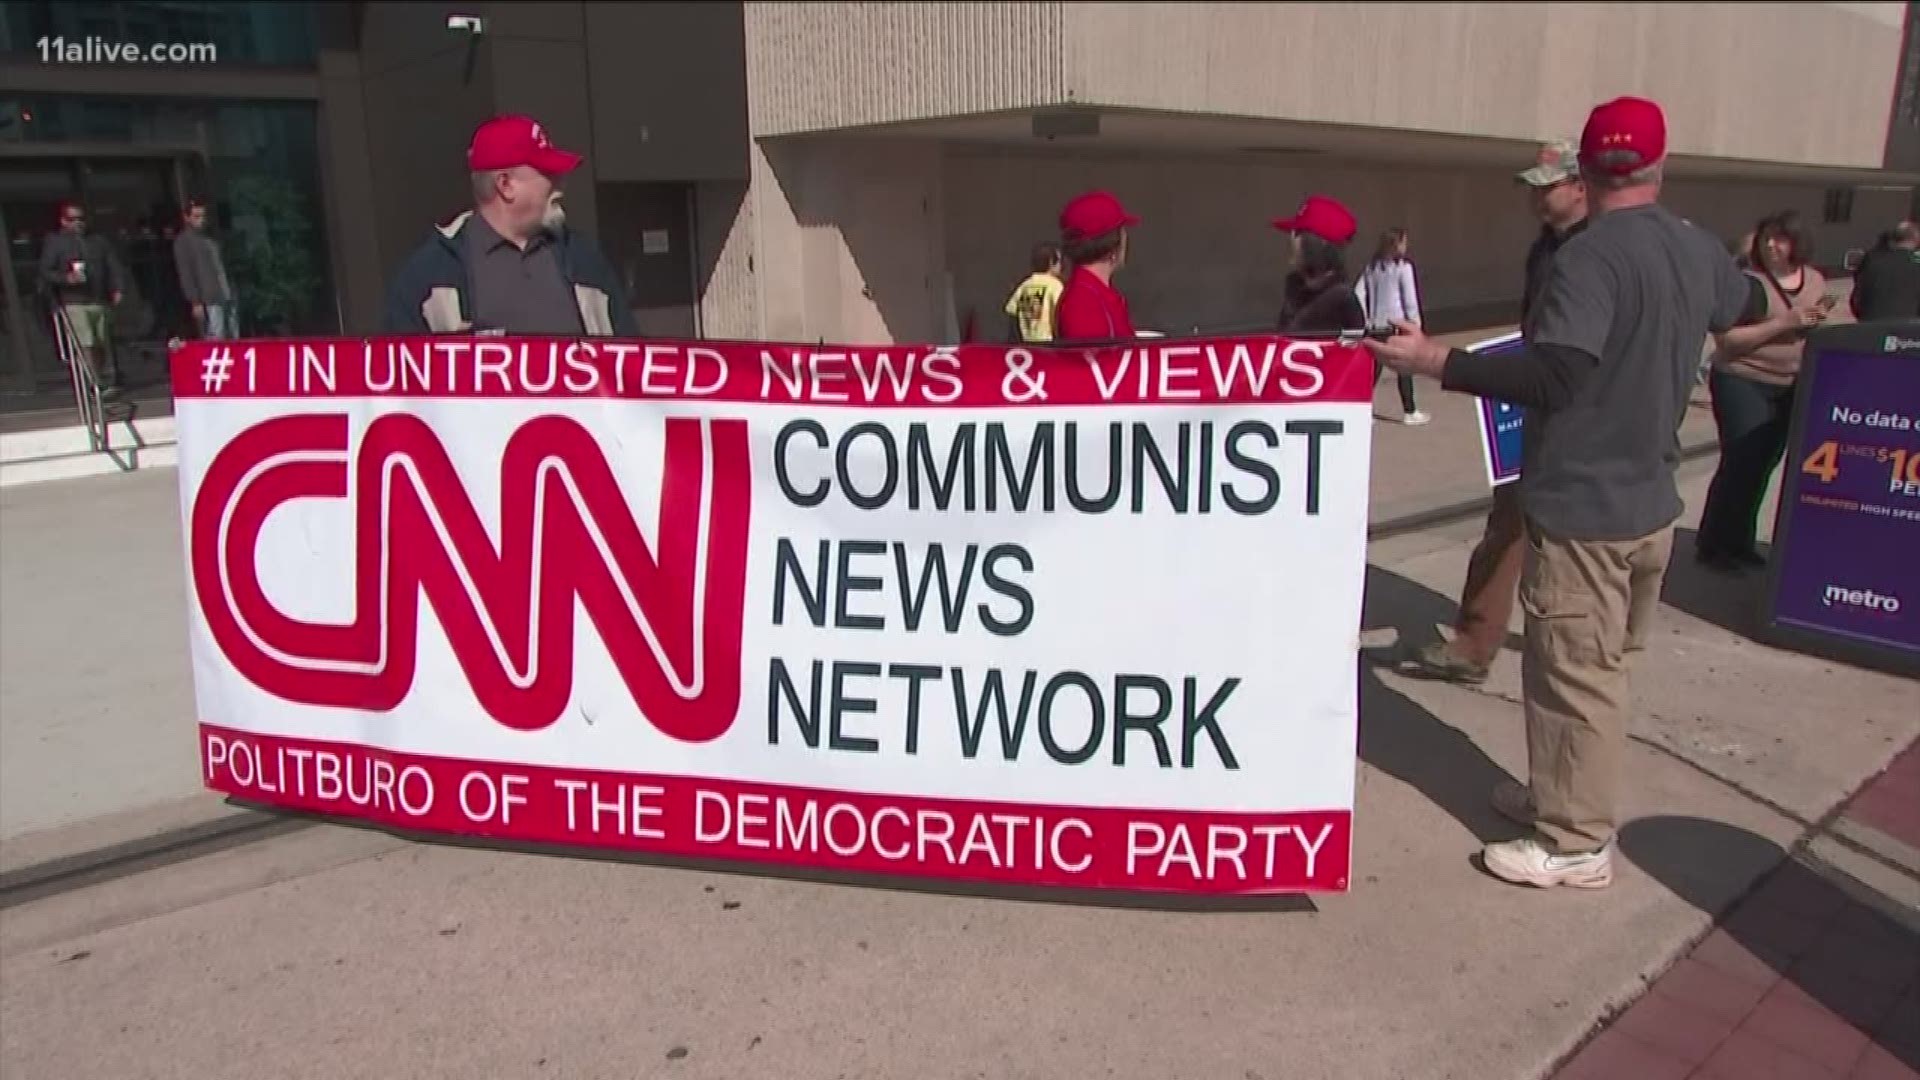 Several supporters of Donald Trump gathered outside the CNN headquarters to protest their coverage and back the president.